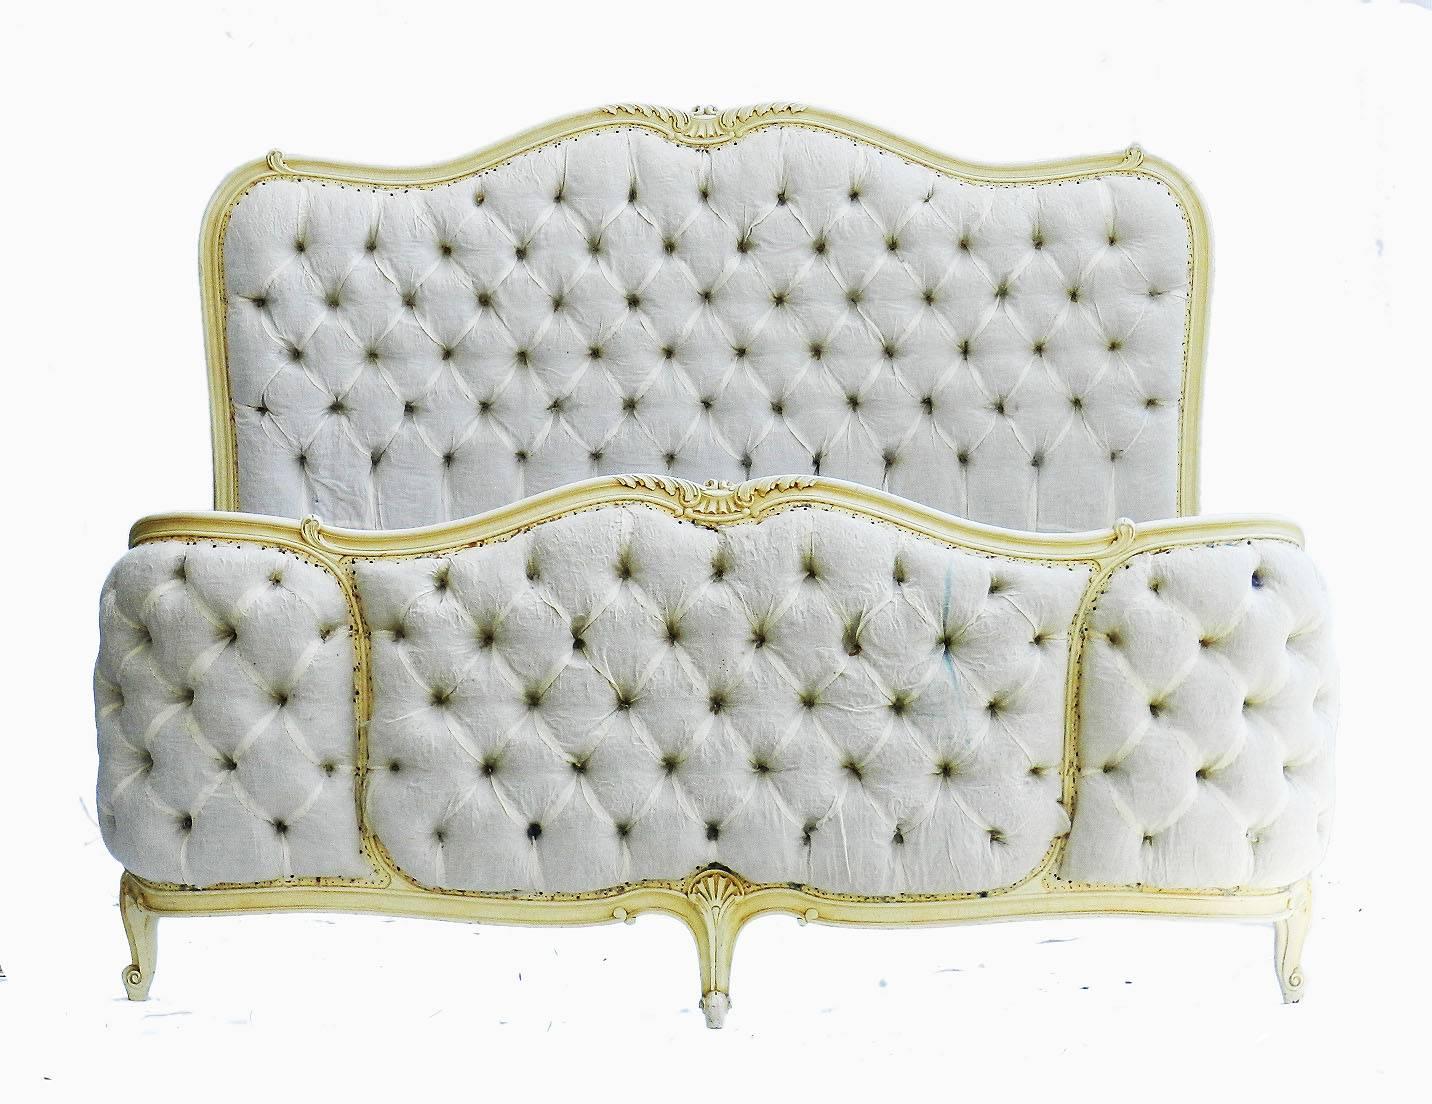 Stunning French bed and base UK king-size US Queen corbeille button back or tufted ready for top covers
Original craquelure to wooden frame sound and solid
This will take a standard 5 ft wide Mattress US or UK on the customized slatted wood base